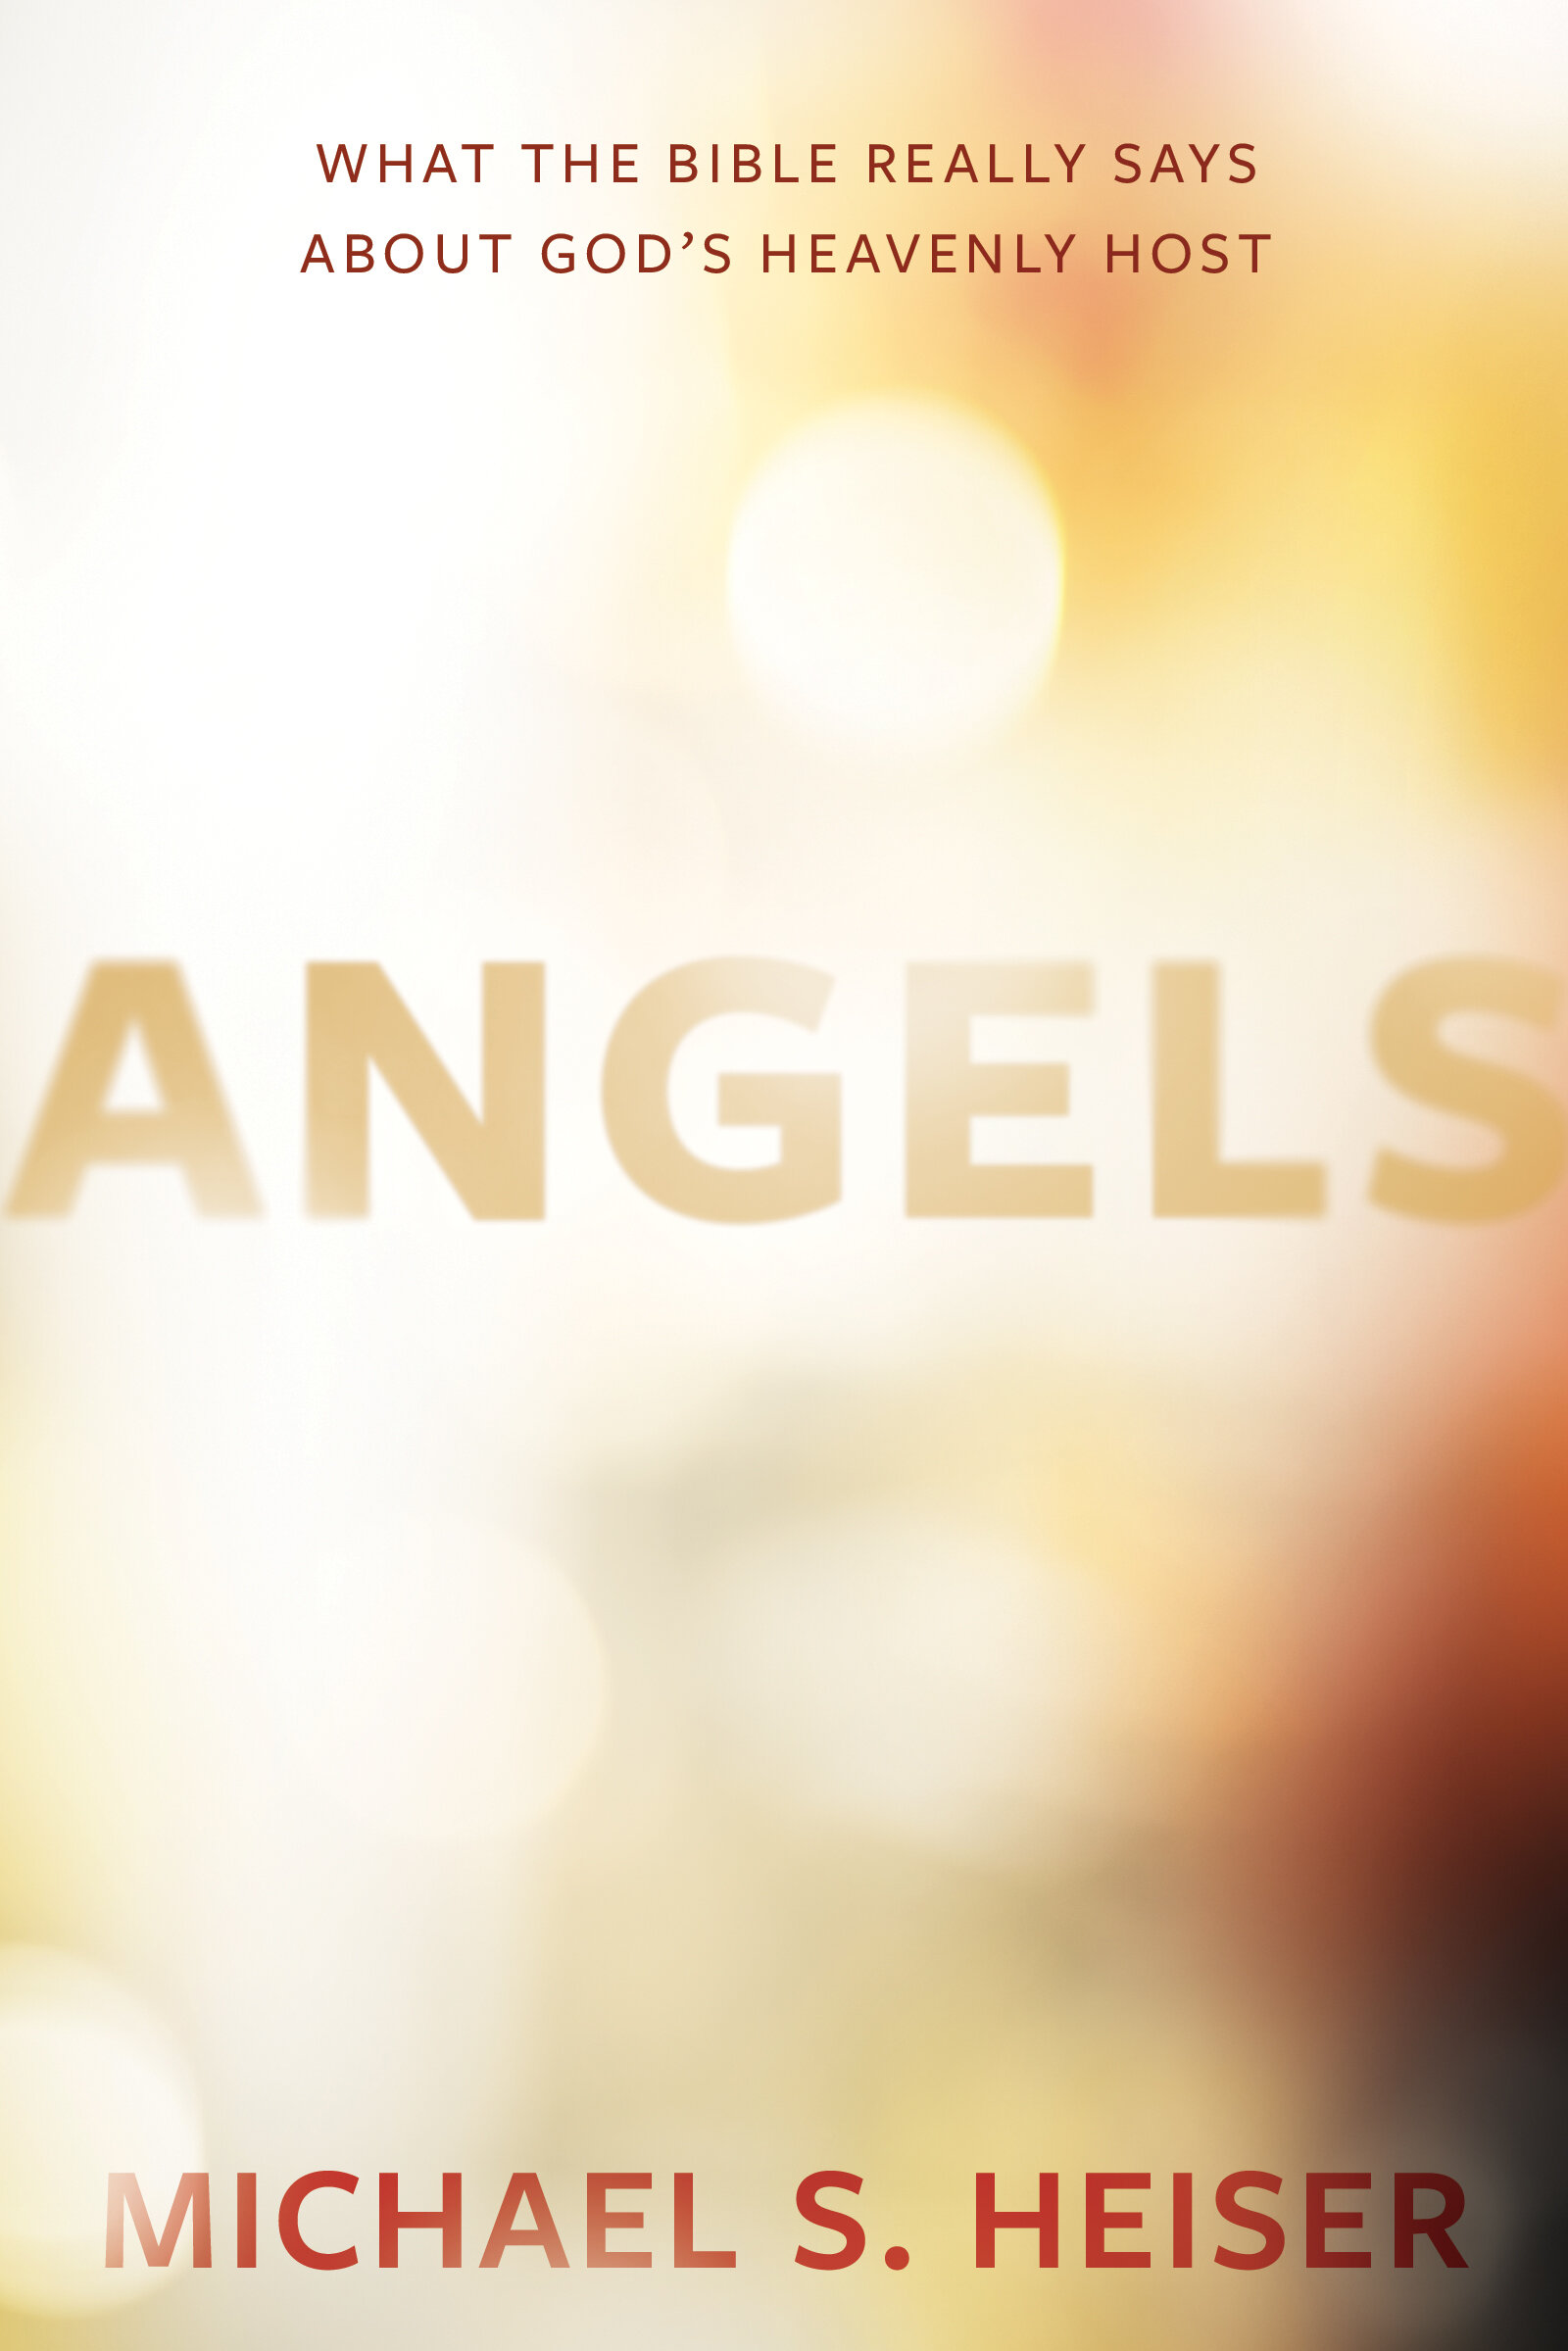 Angels: What the Bible Really Says about God’s Heavenly Host